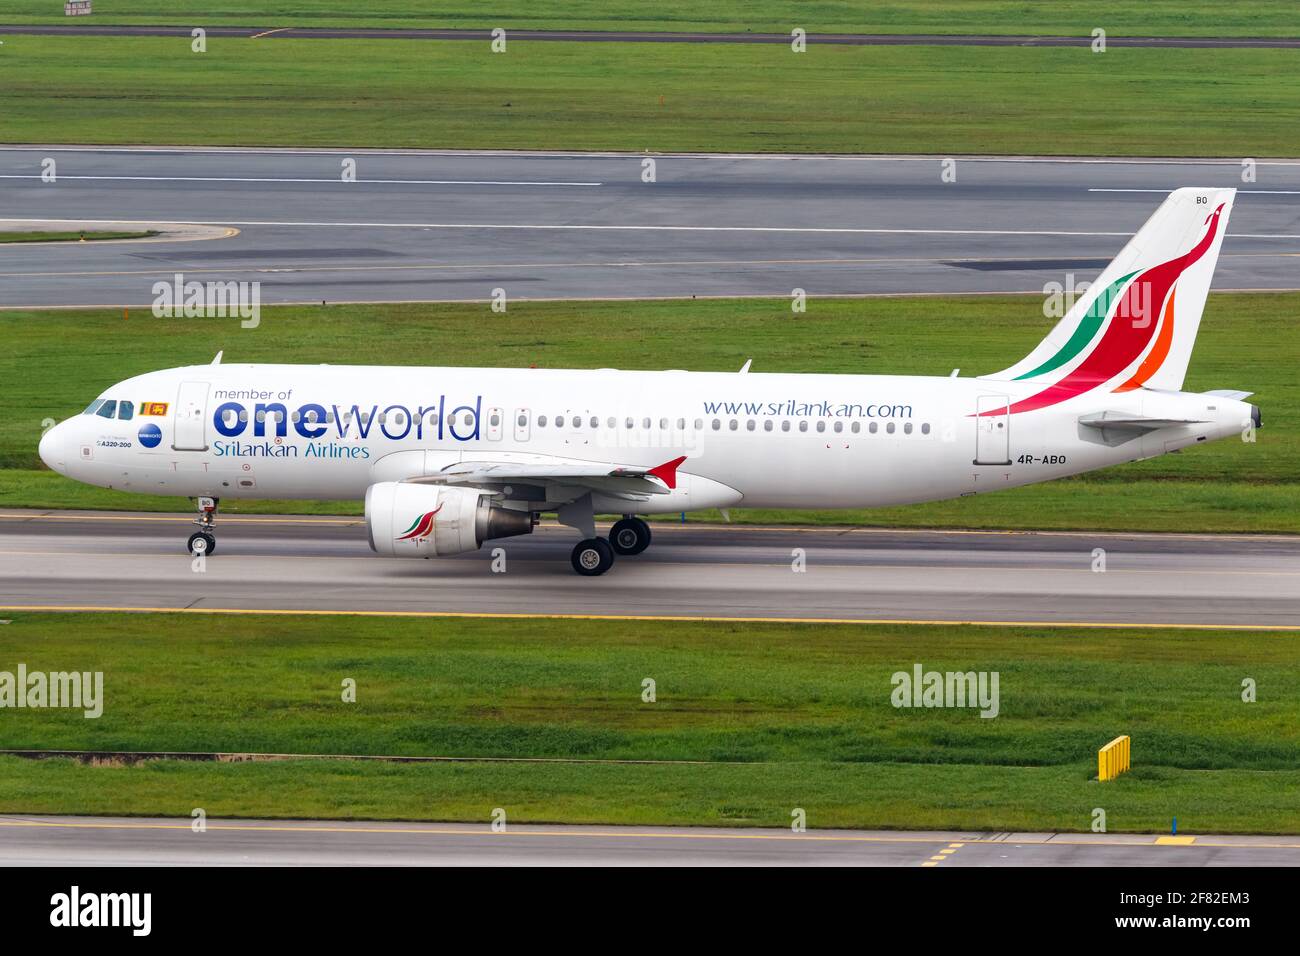 Changi, Singapore – January 29, 2018: SriLankan Airlines Airbus A320 airplane at Changi airport (SIN) in Singapore. Airbus is a European aircraft manu Stock Photo